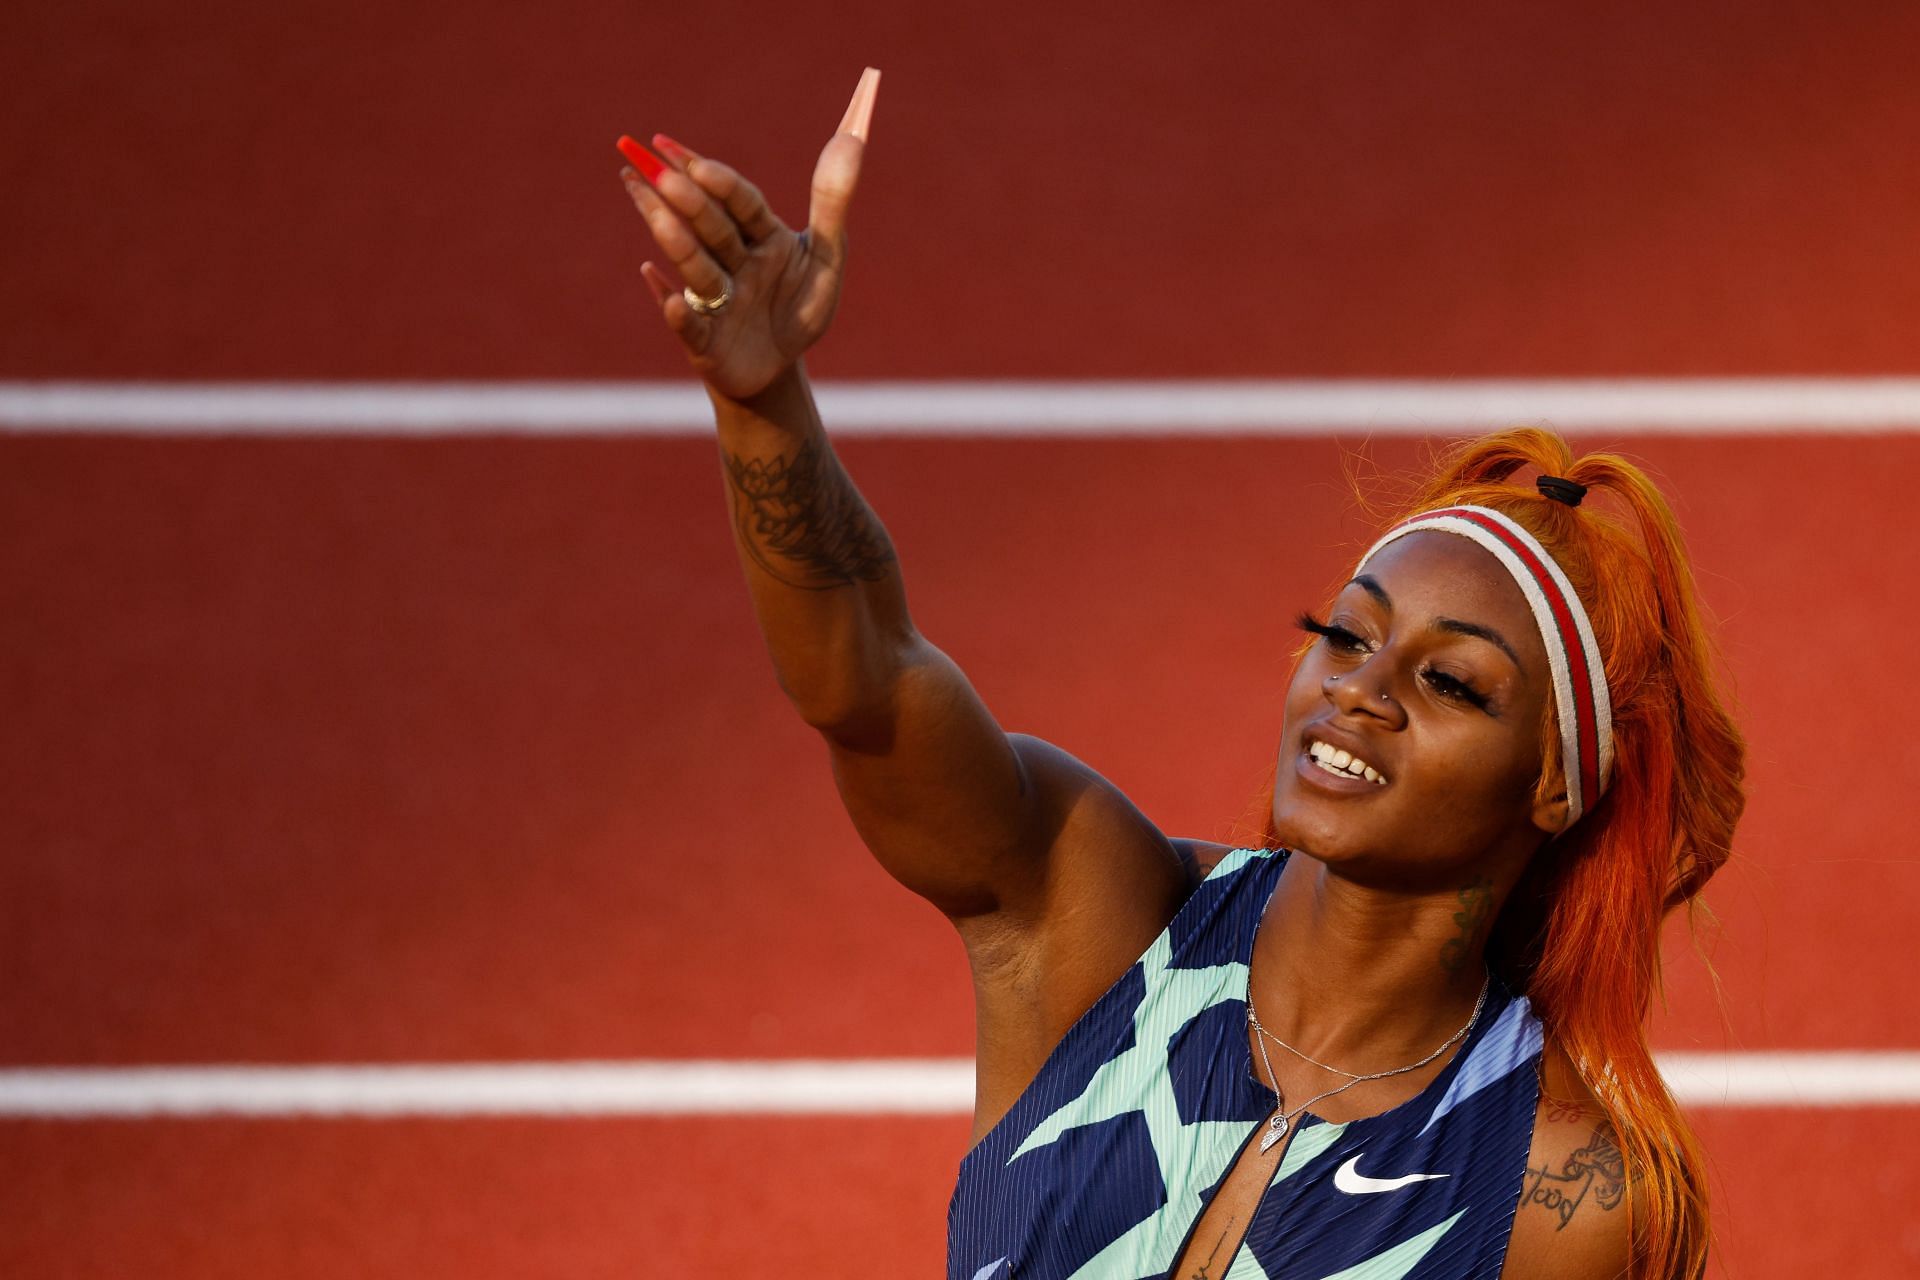 Sha&#039;Carri Richardson at the 2020 U.S. Olympic Track &amp; Field Team Trials - Day 2 (Image: Getty)